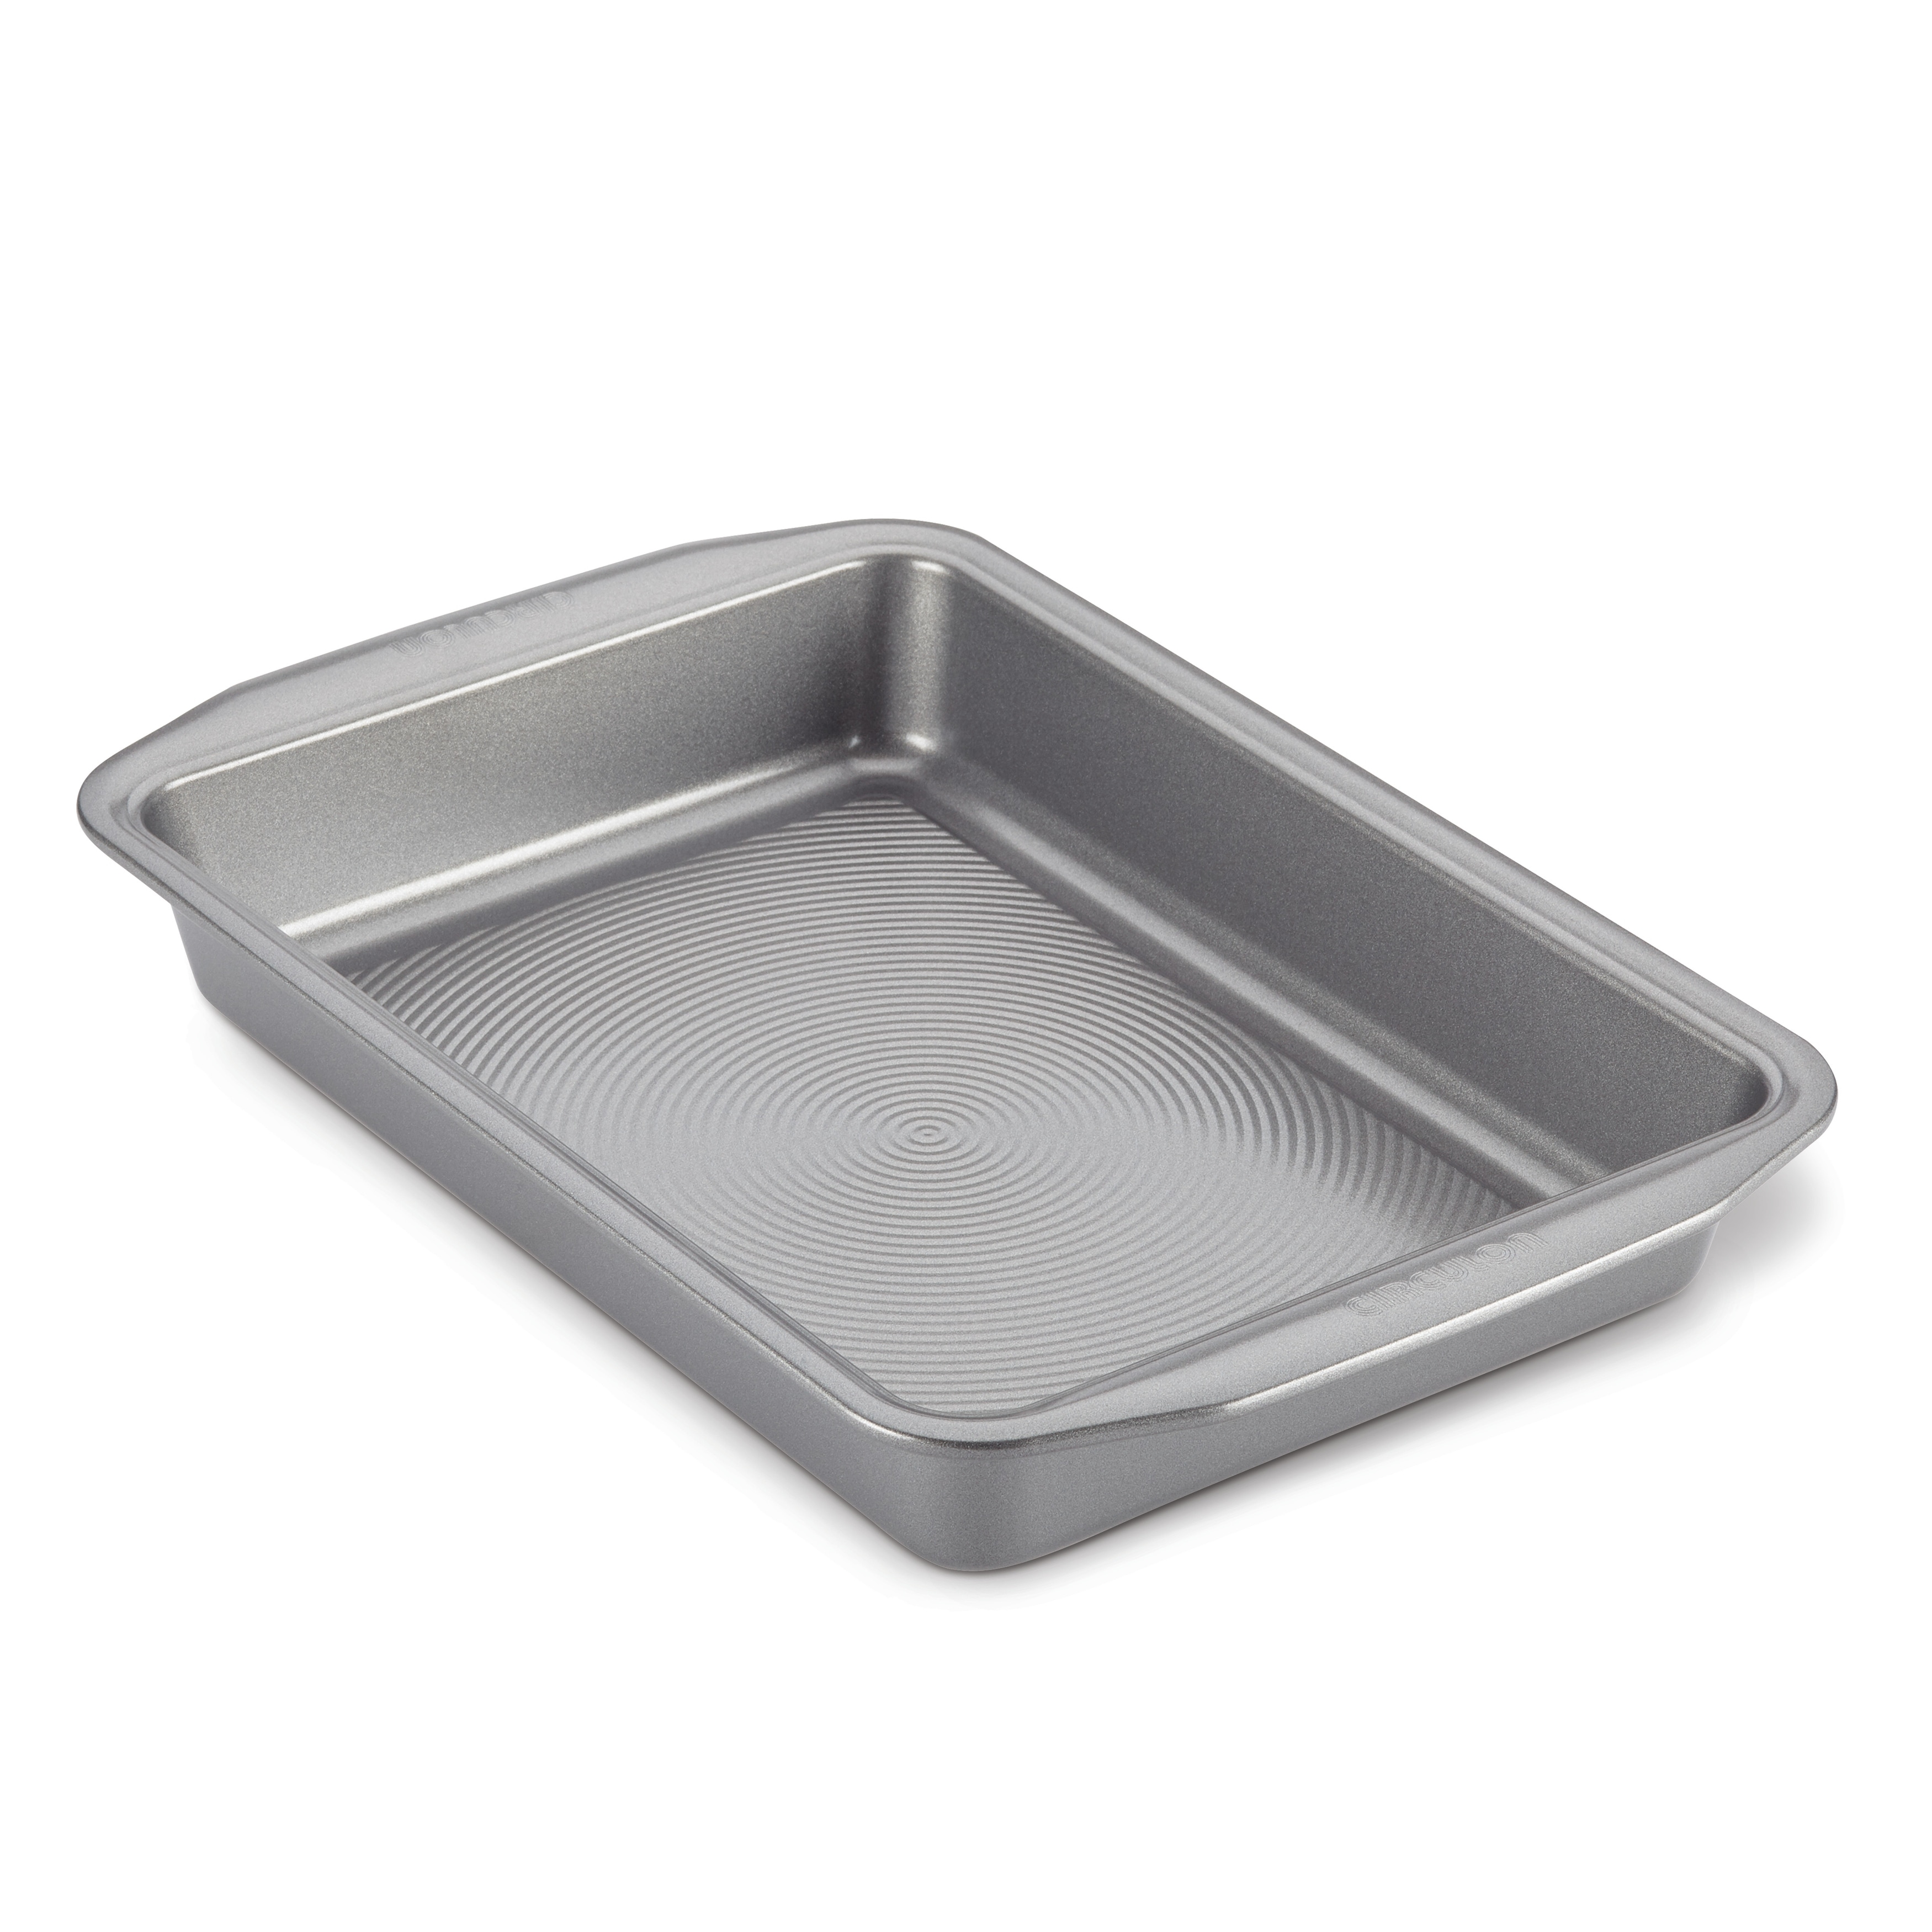 Anolon Advanced Bakeware Nonstick Rectangular Cake Pan, 9-Inch x 13-Inch,  Gray with Silicone Grips